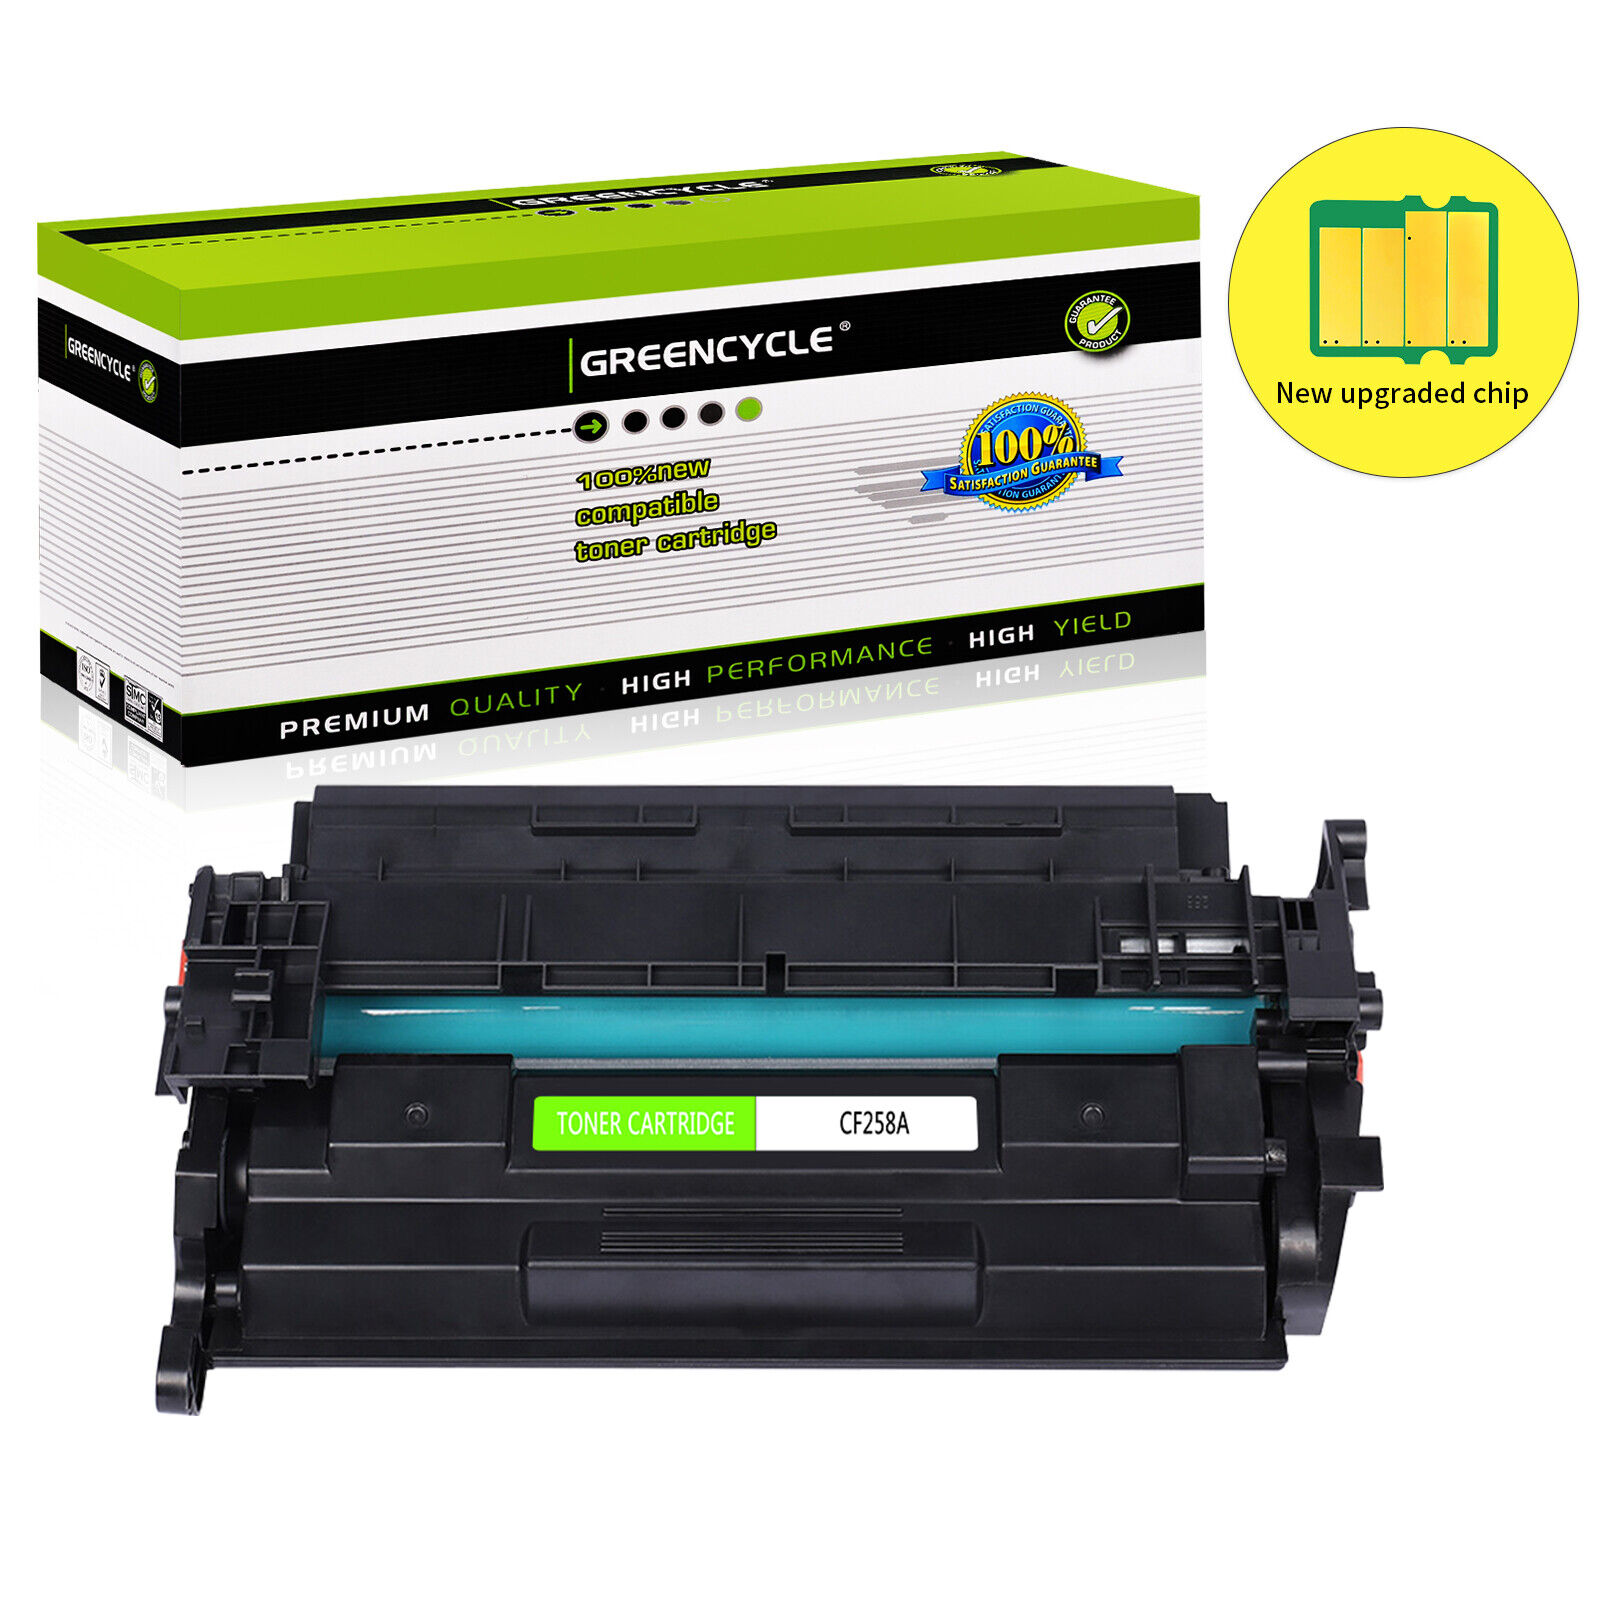 GREENCYCLE CF258A with Chip Toner Cartridge For HP LaserJet Pro MFP M428fdw Lot